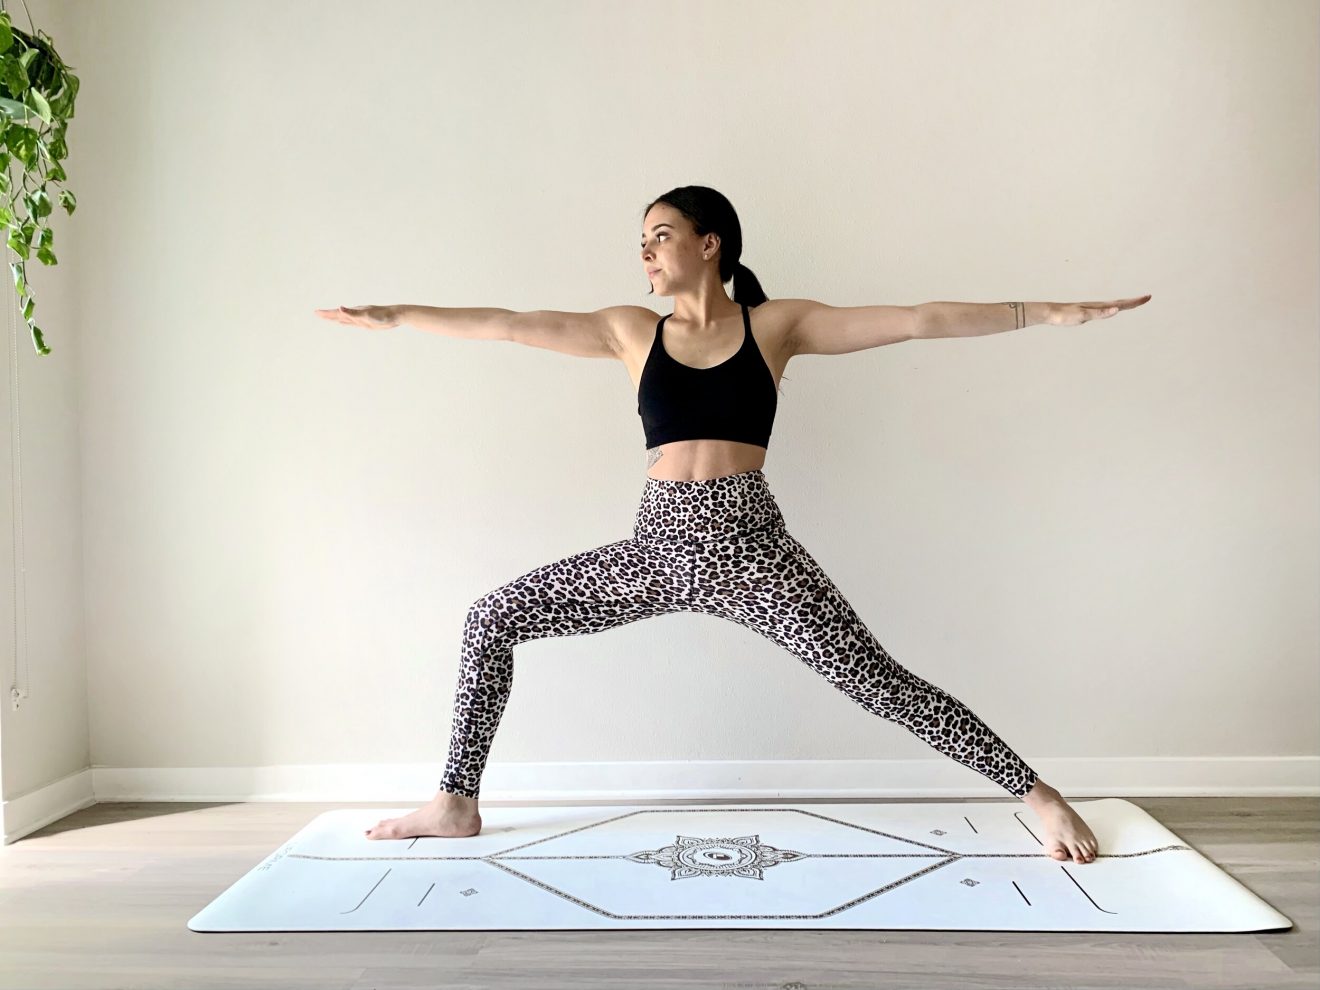 Yoga For Building Focus And Attention